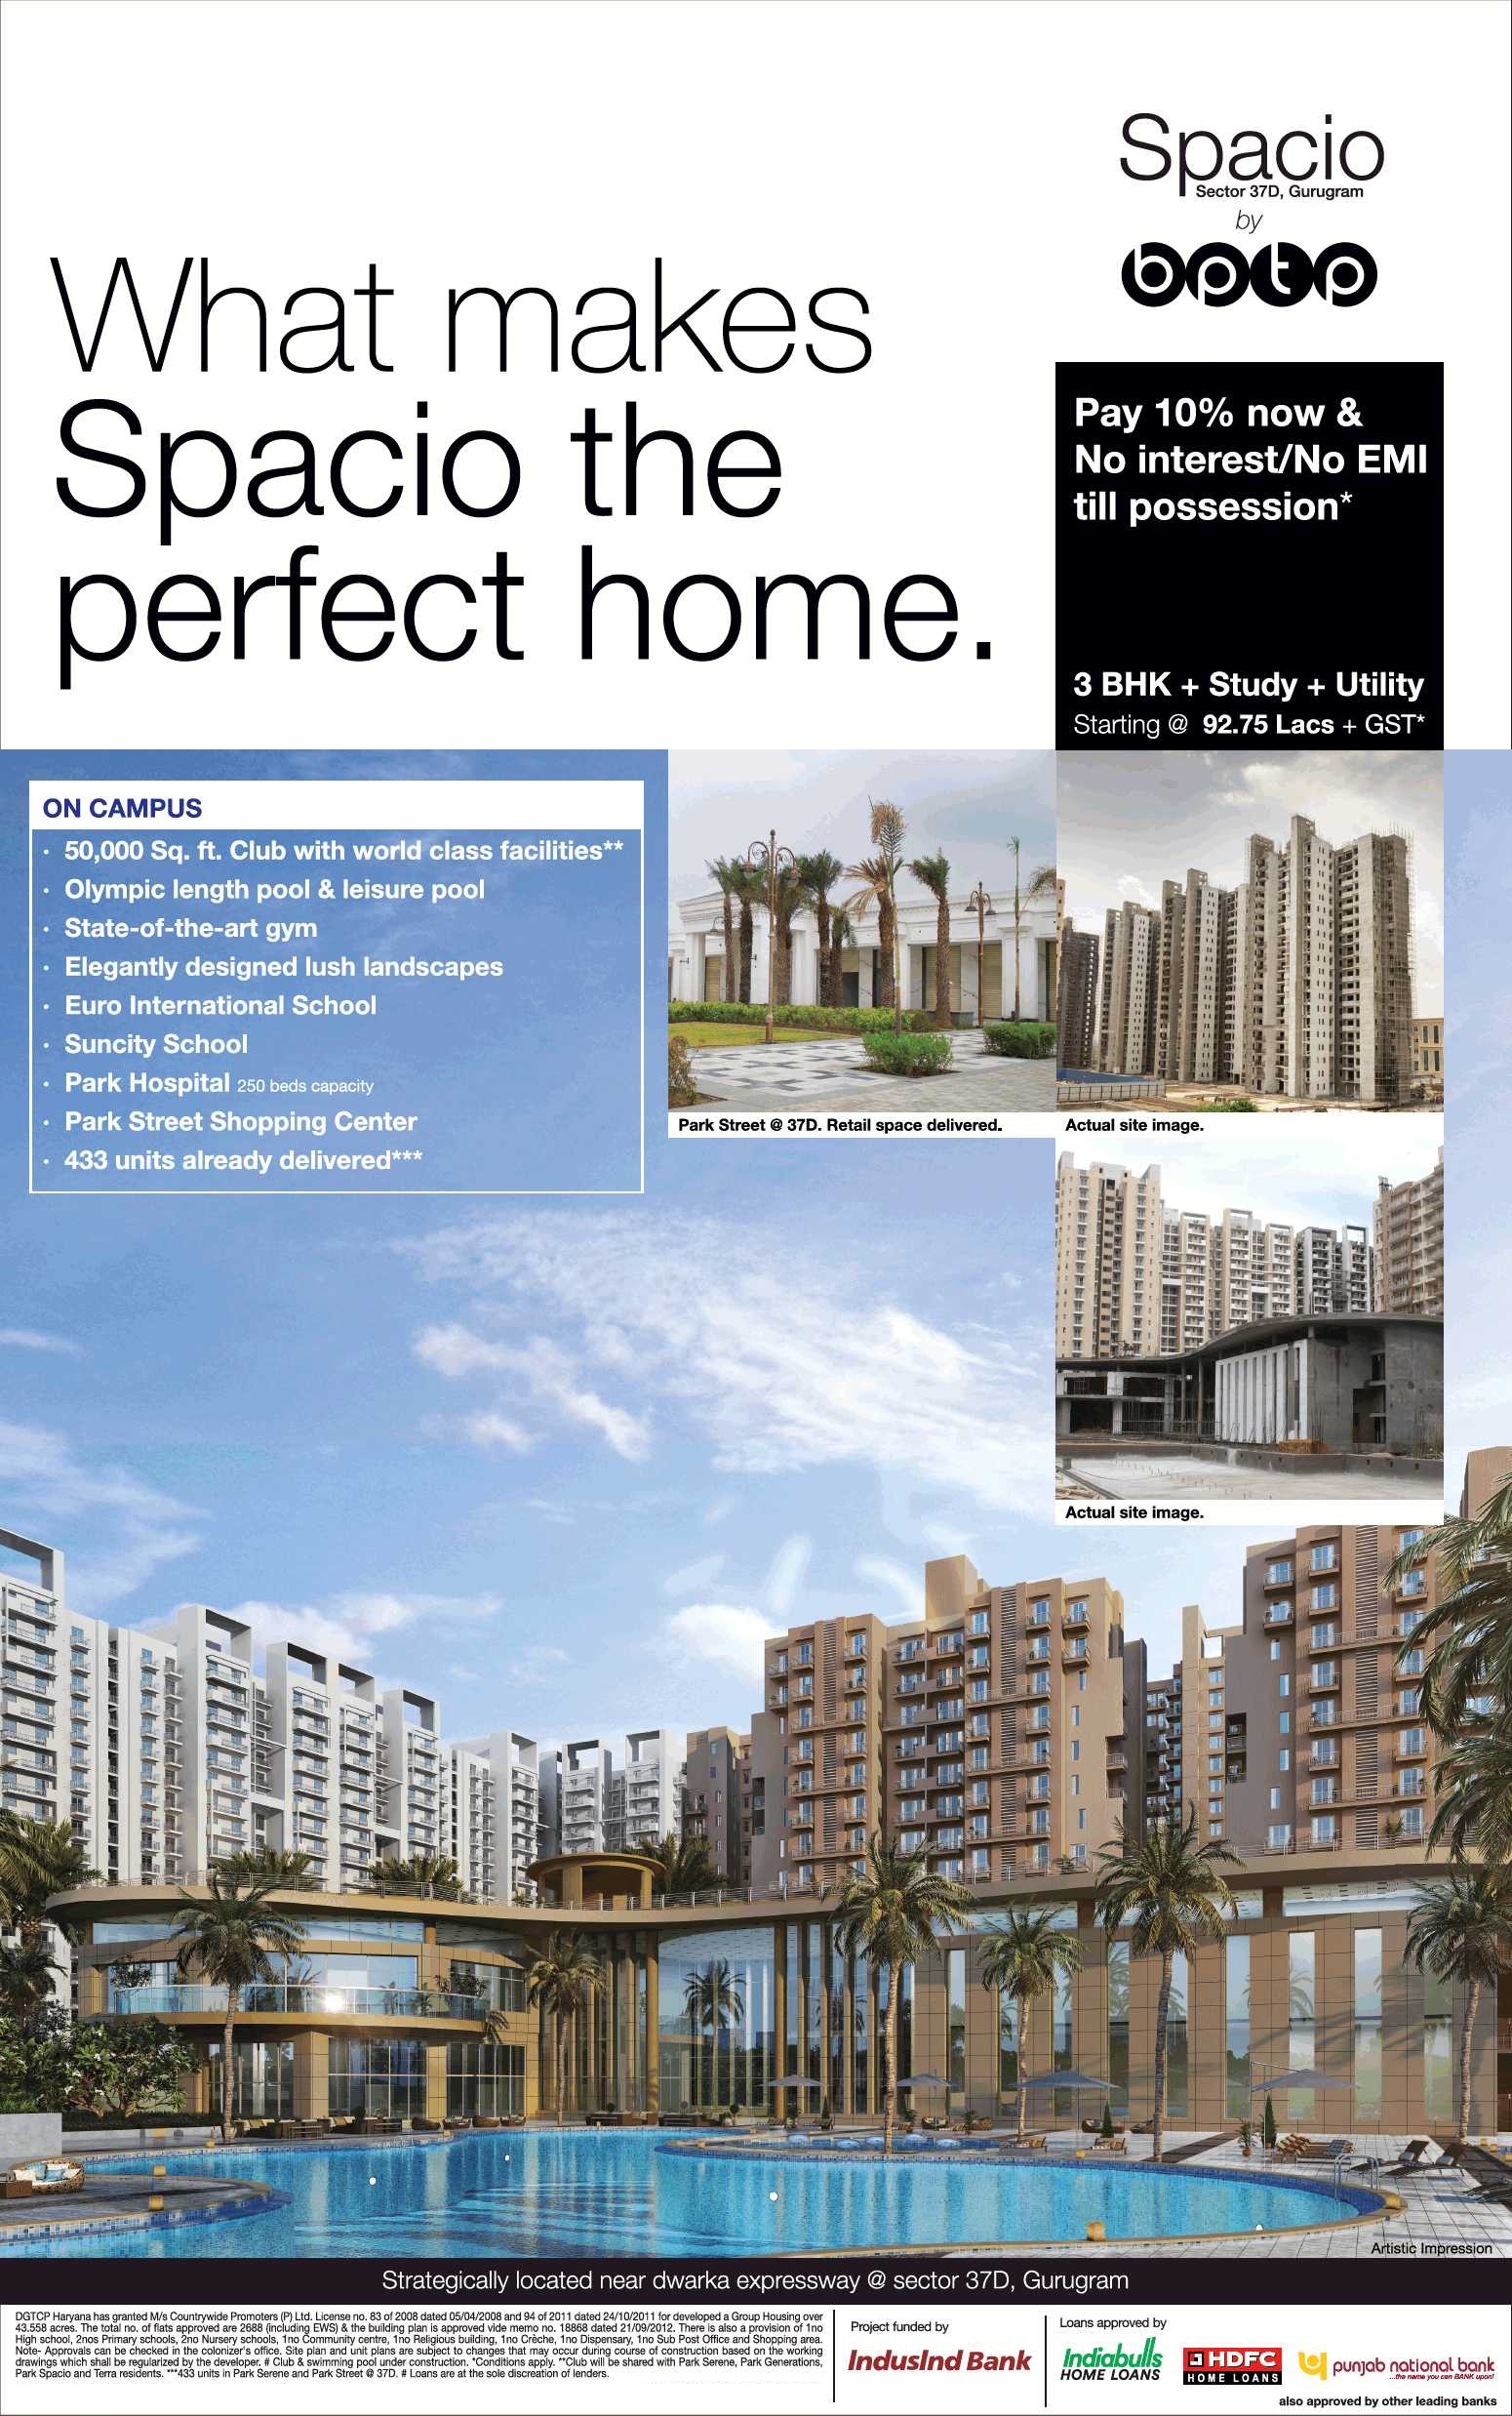 BPTP Spacio Park Serene launching 3 bhk+utility+study at Rs.92.75 lakhs in Gurgaon Update